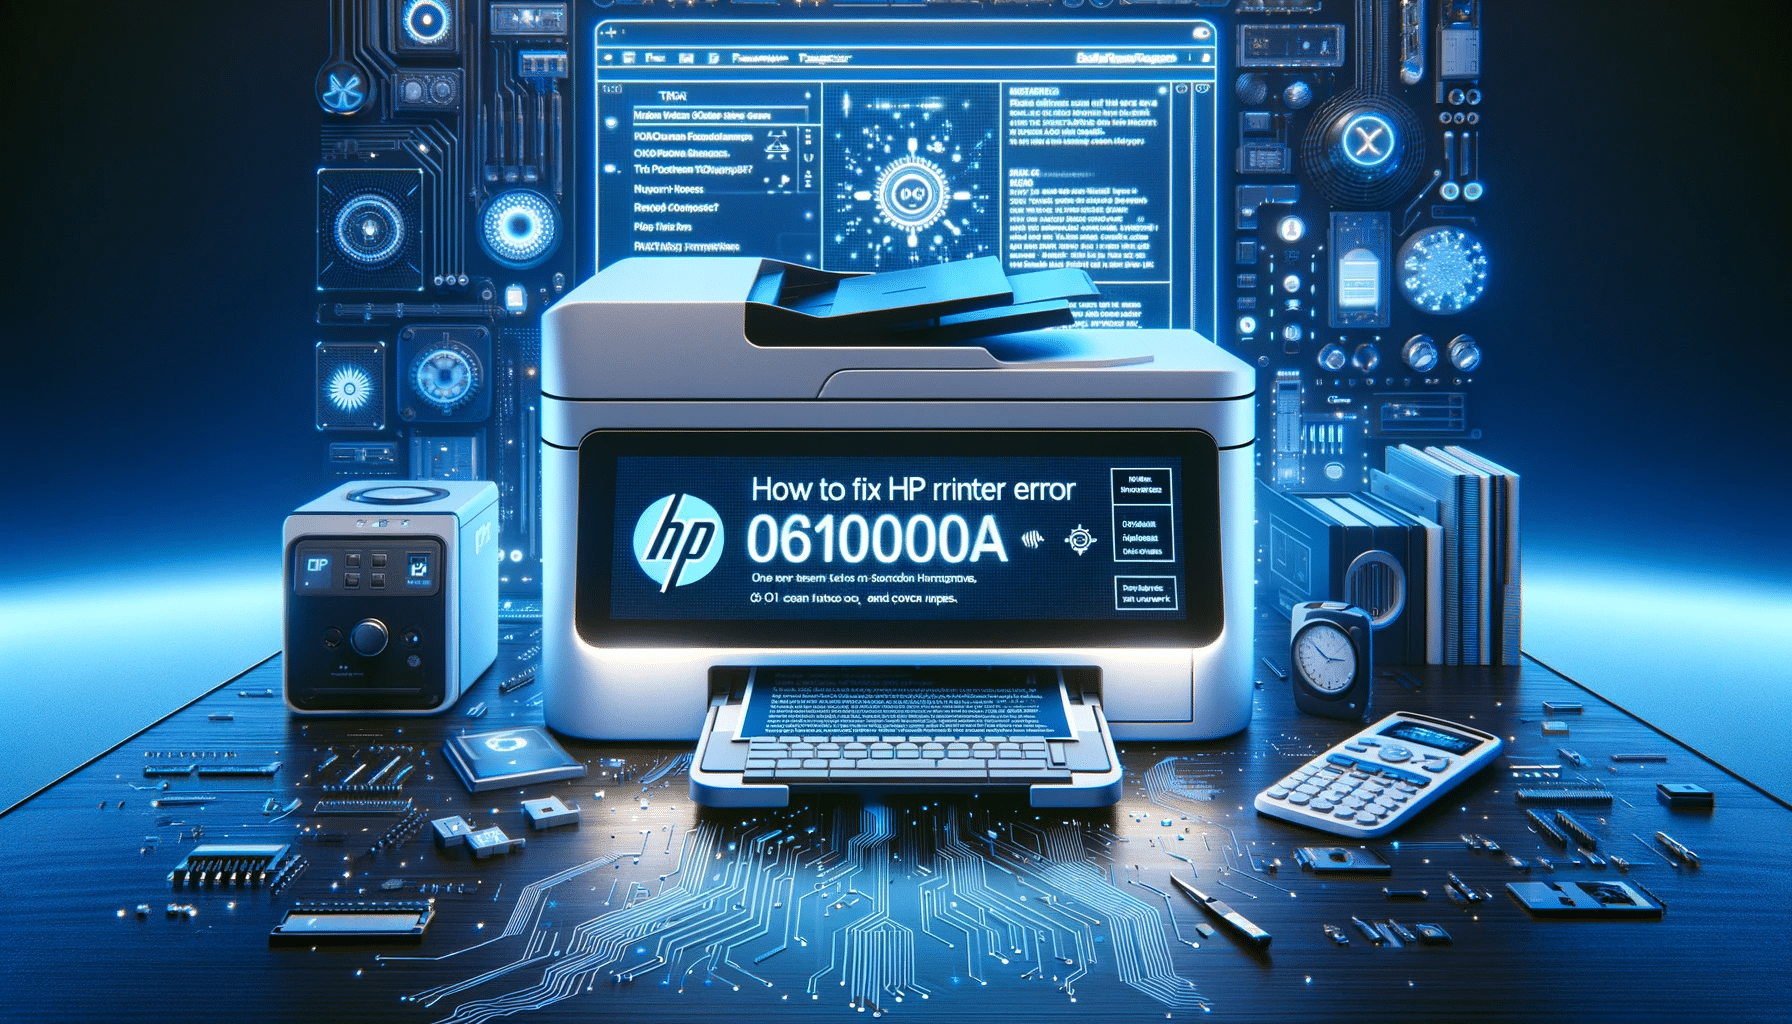 DALL·E 2023 11 28 18.11.42 Create a hyper realistic image in 8k resolution for a tech blog post focusing on fixing the HP printer error 0x6100004a. The image should have a tech